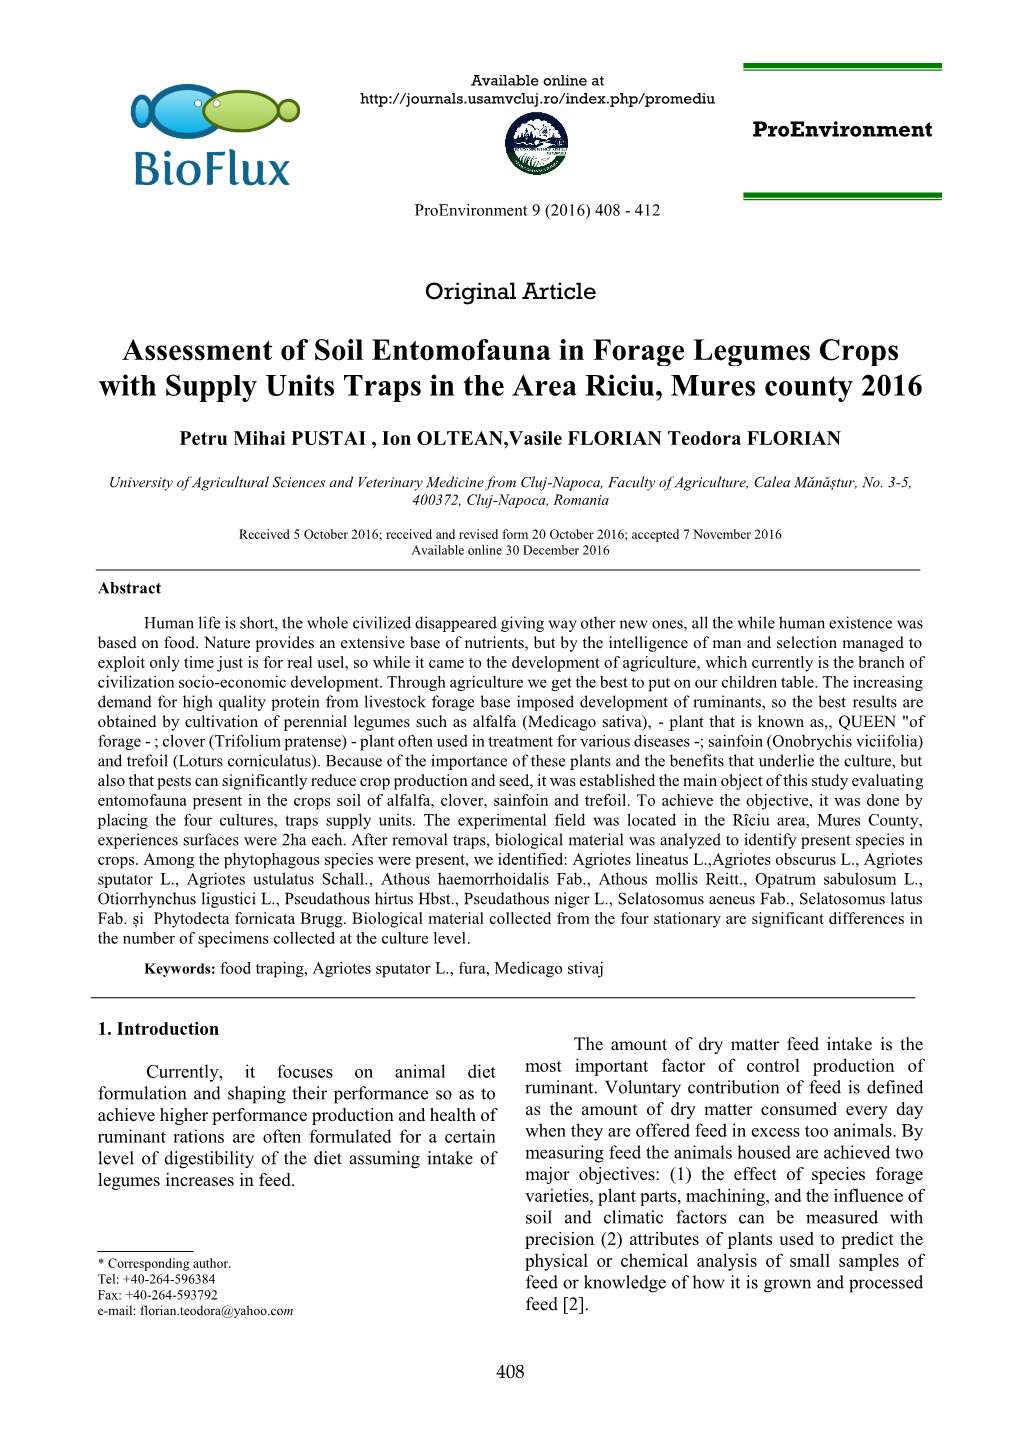 Assessment of Soil Entomofauna in Forage Legumes Crops with Supply Units Traps in the Area Riciu, Mures County 2016